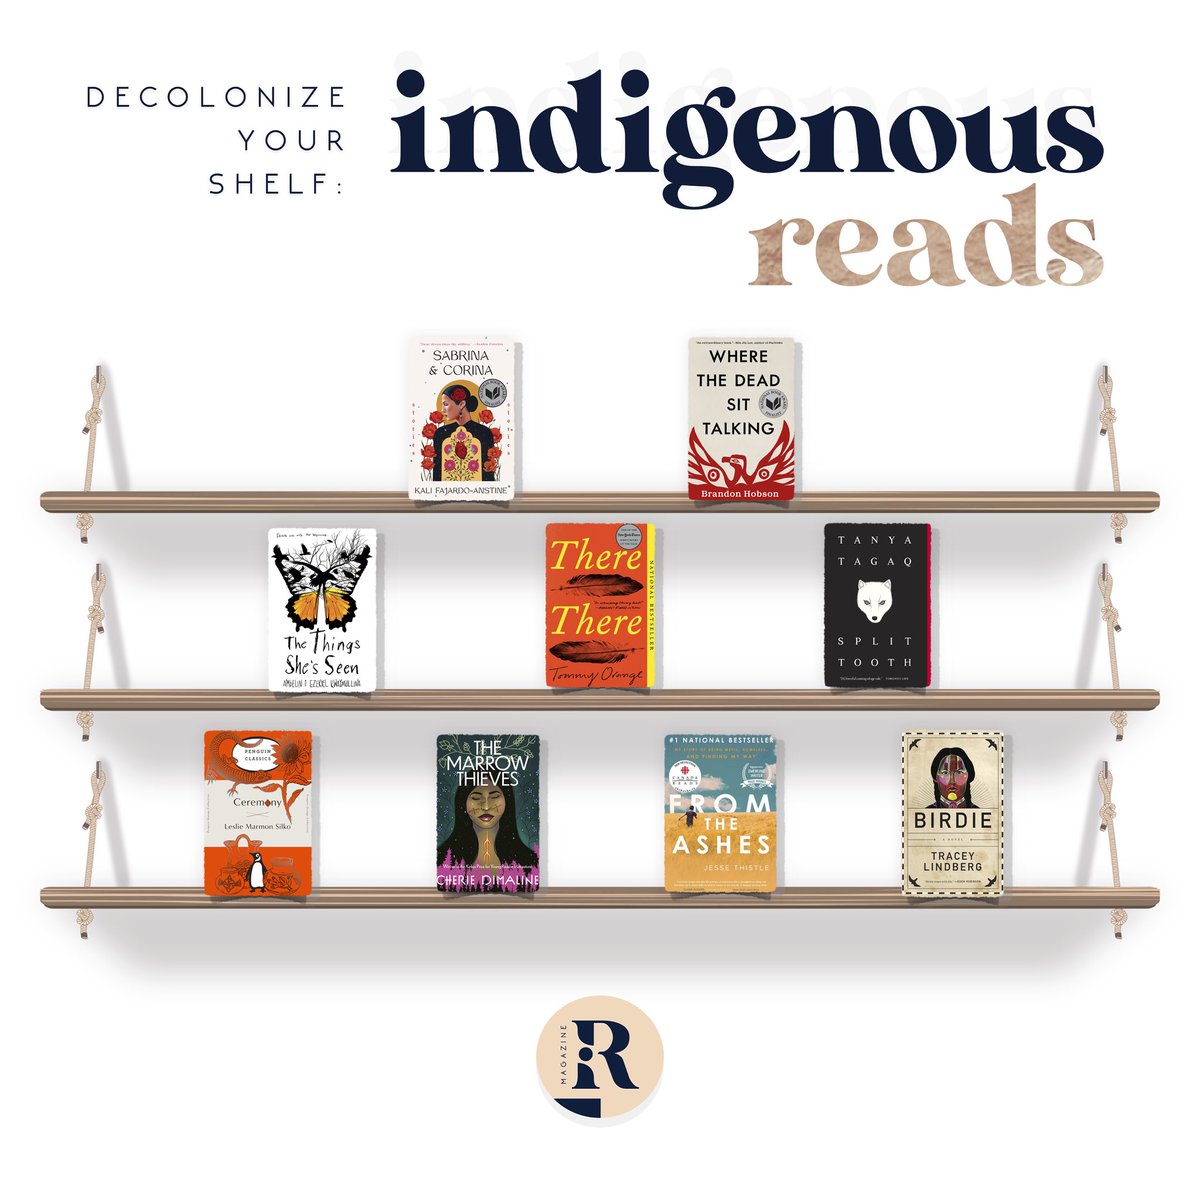 Calling all readers: looking for new titles to add to your shelf on  #IndigenousPeoplesDay?These 9 selected works span an array of genres — from memoirs to historical fiction — while emphasizing the experiences of indigenous communities. (1/3)